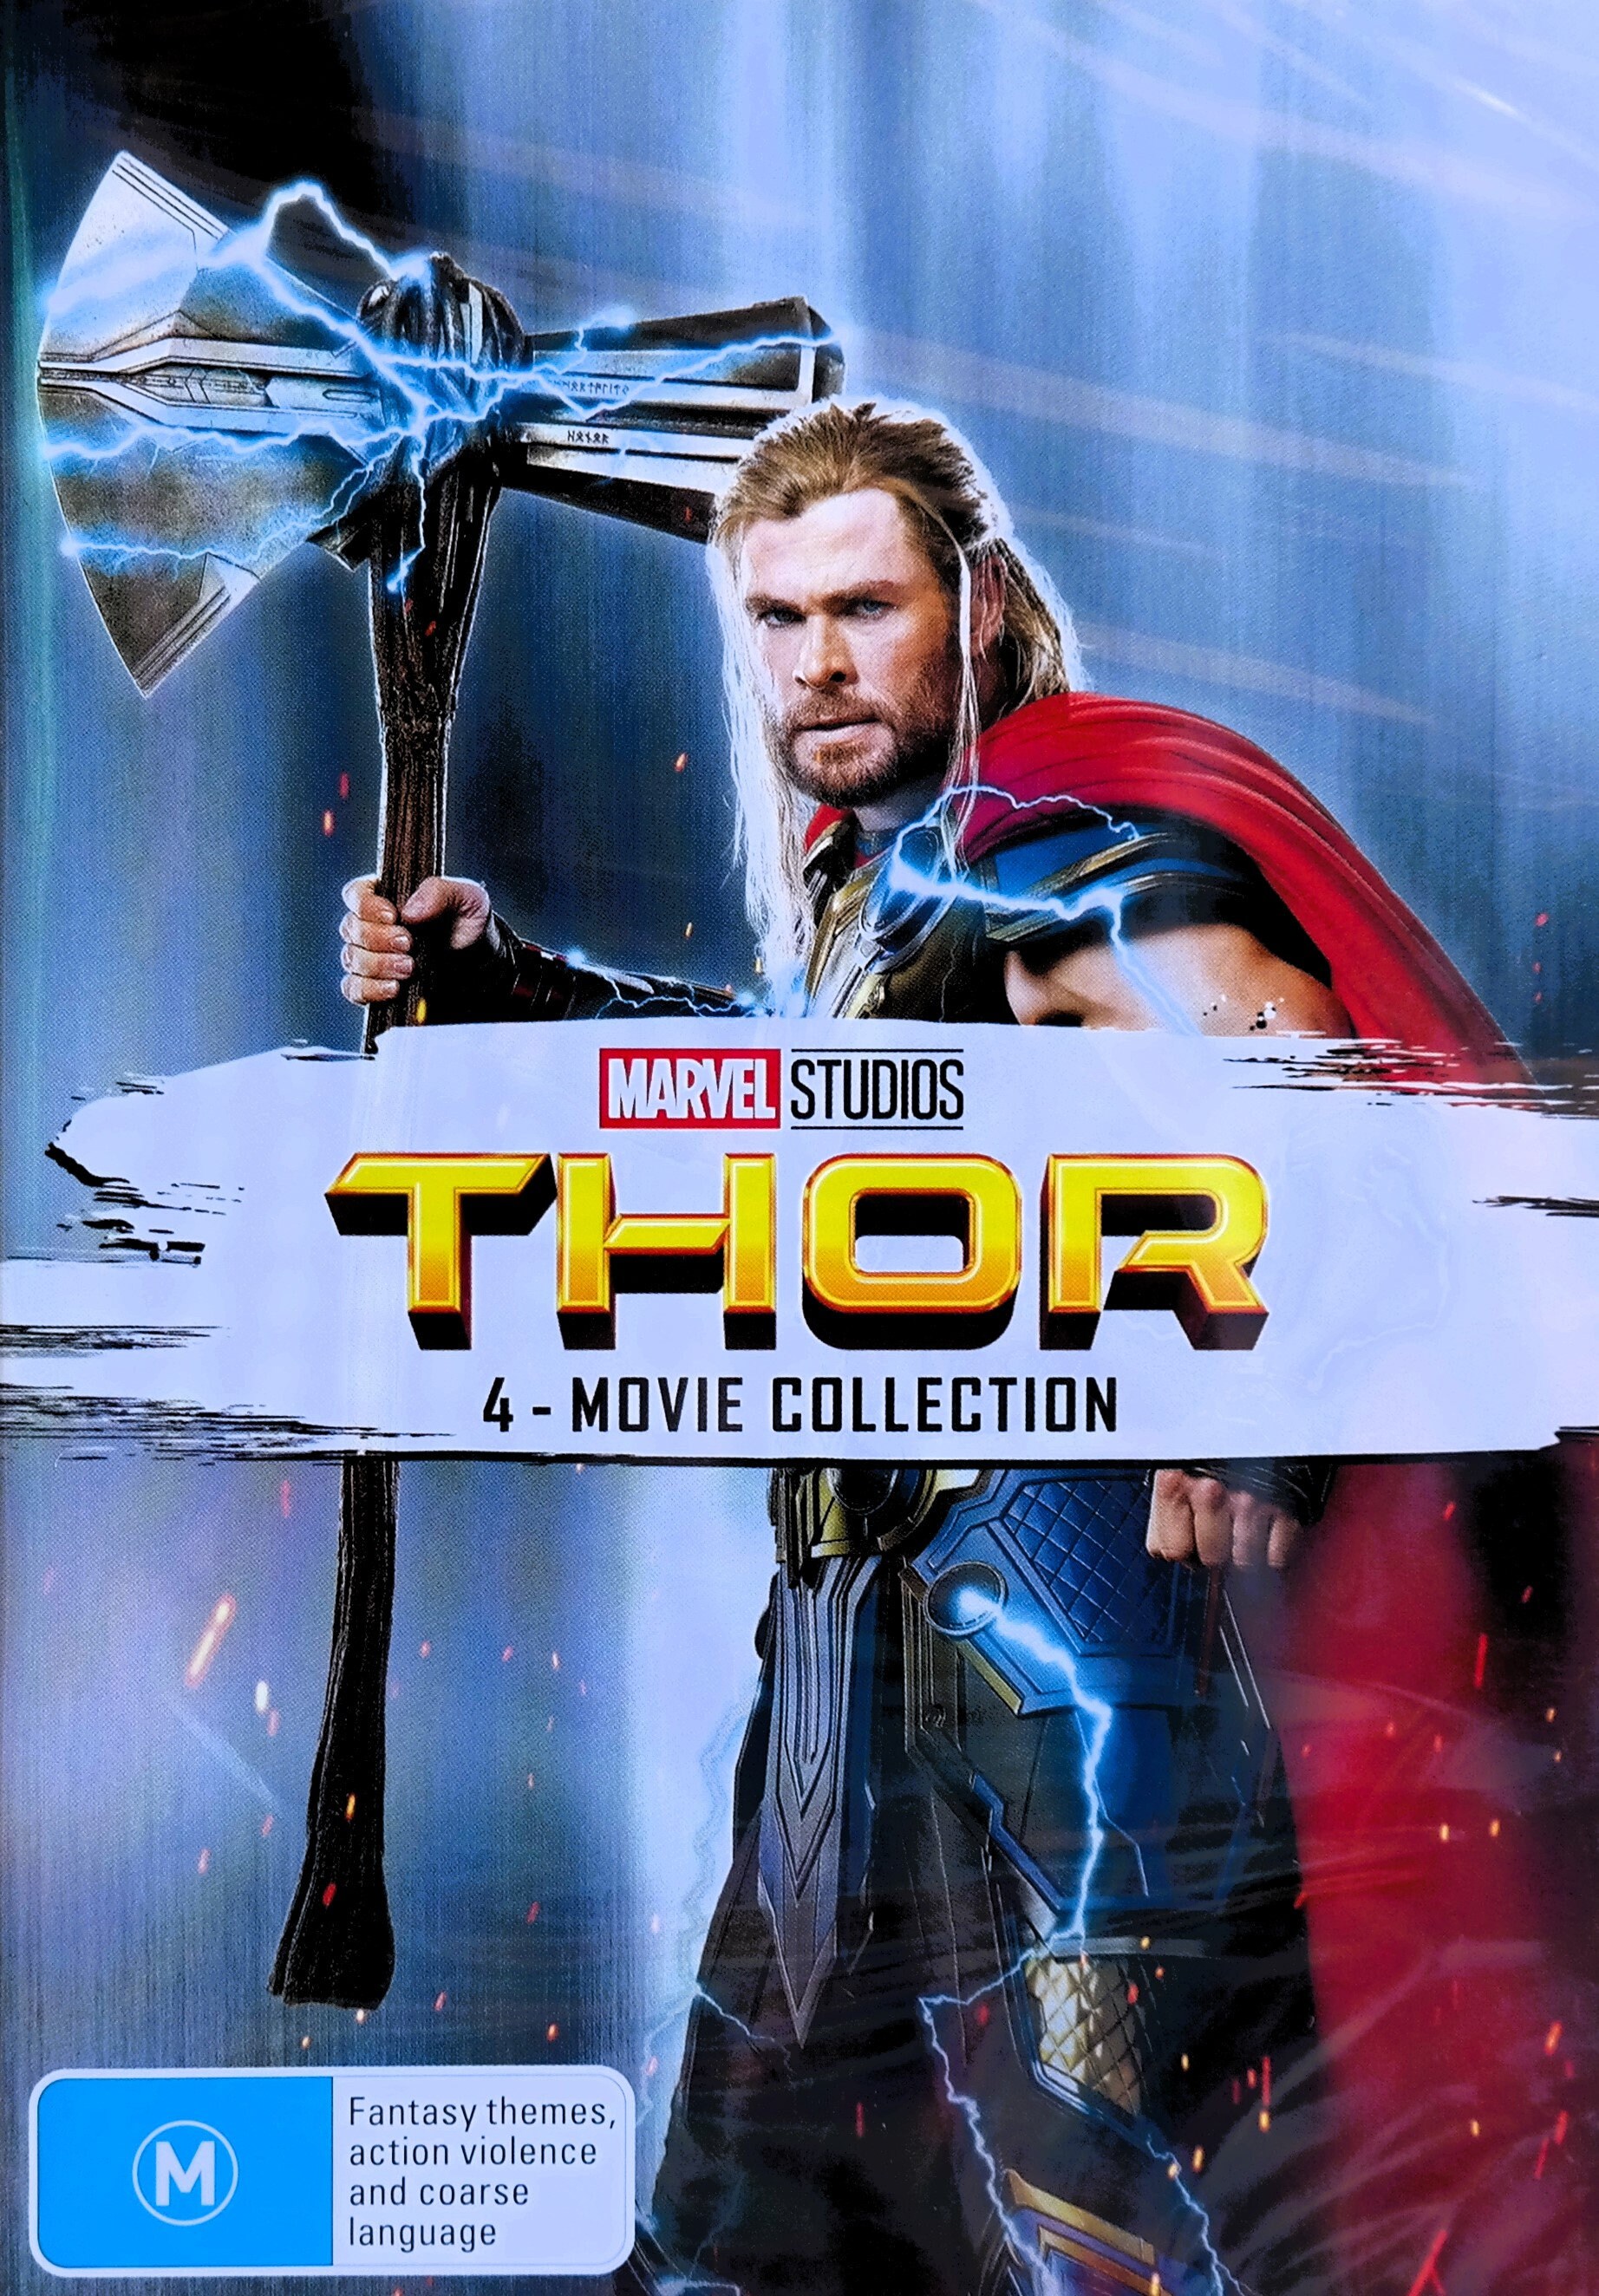 The Avengers Complete 4 DVD Movie Set Includes Avengers Ultron Infinity War End  Game Includes Thor's Hammer Decal 